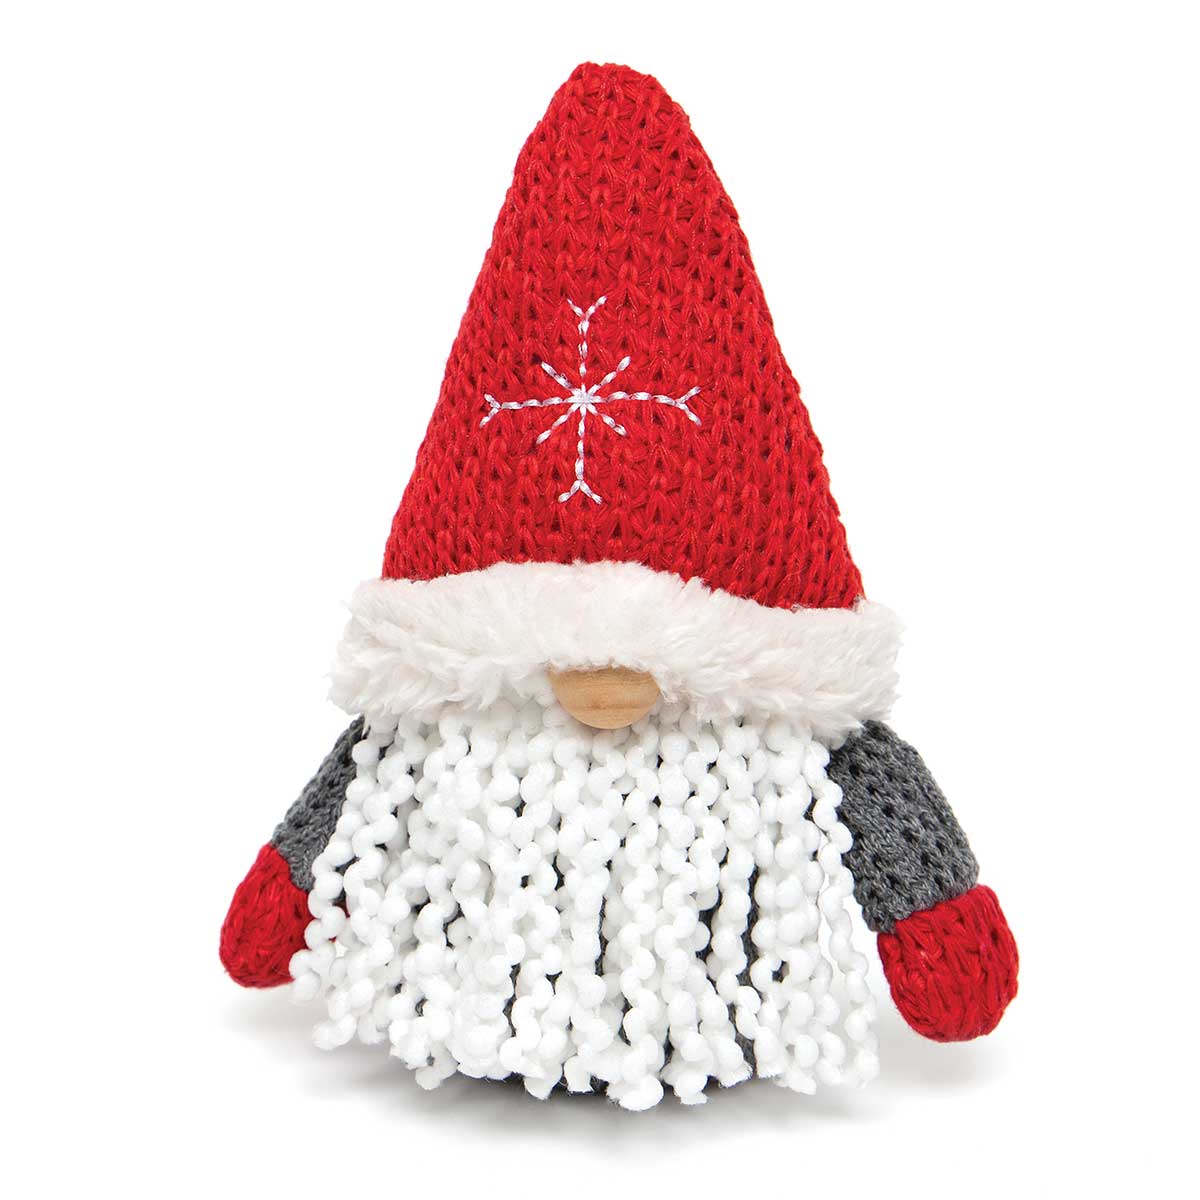 Raglan Gnome Ornament Red/Grey with Knit Hat, Wood Nose, White B